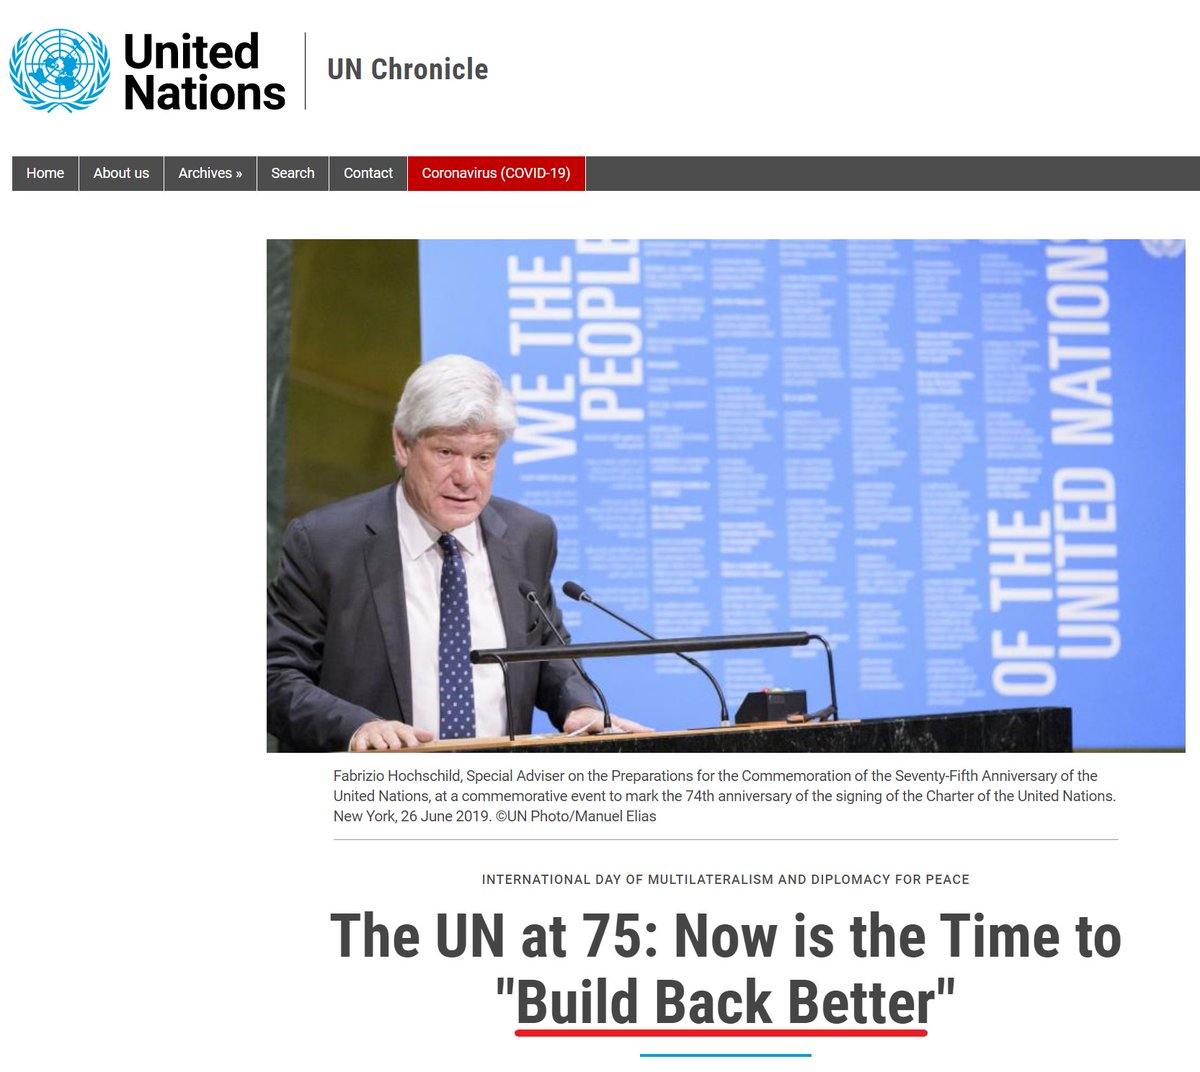 9/12Every conspiring government and corporate enterprise would use the  #BuildBackBetter tagline.